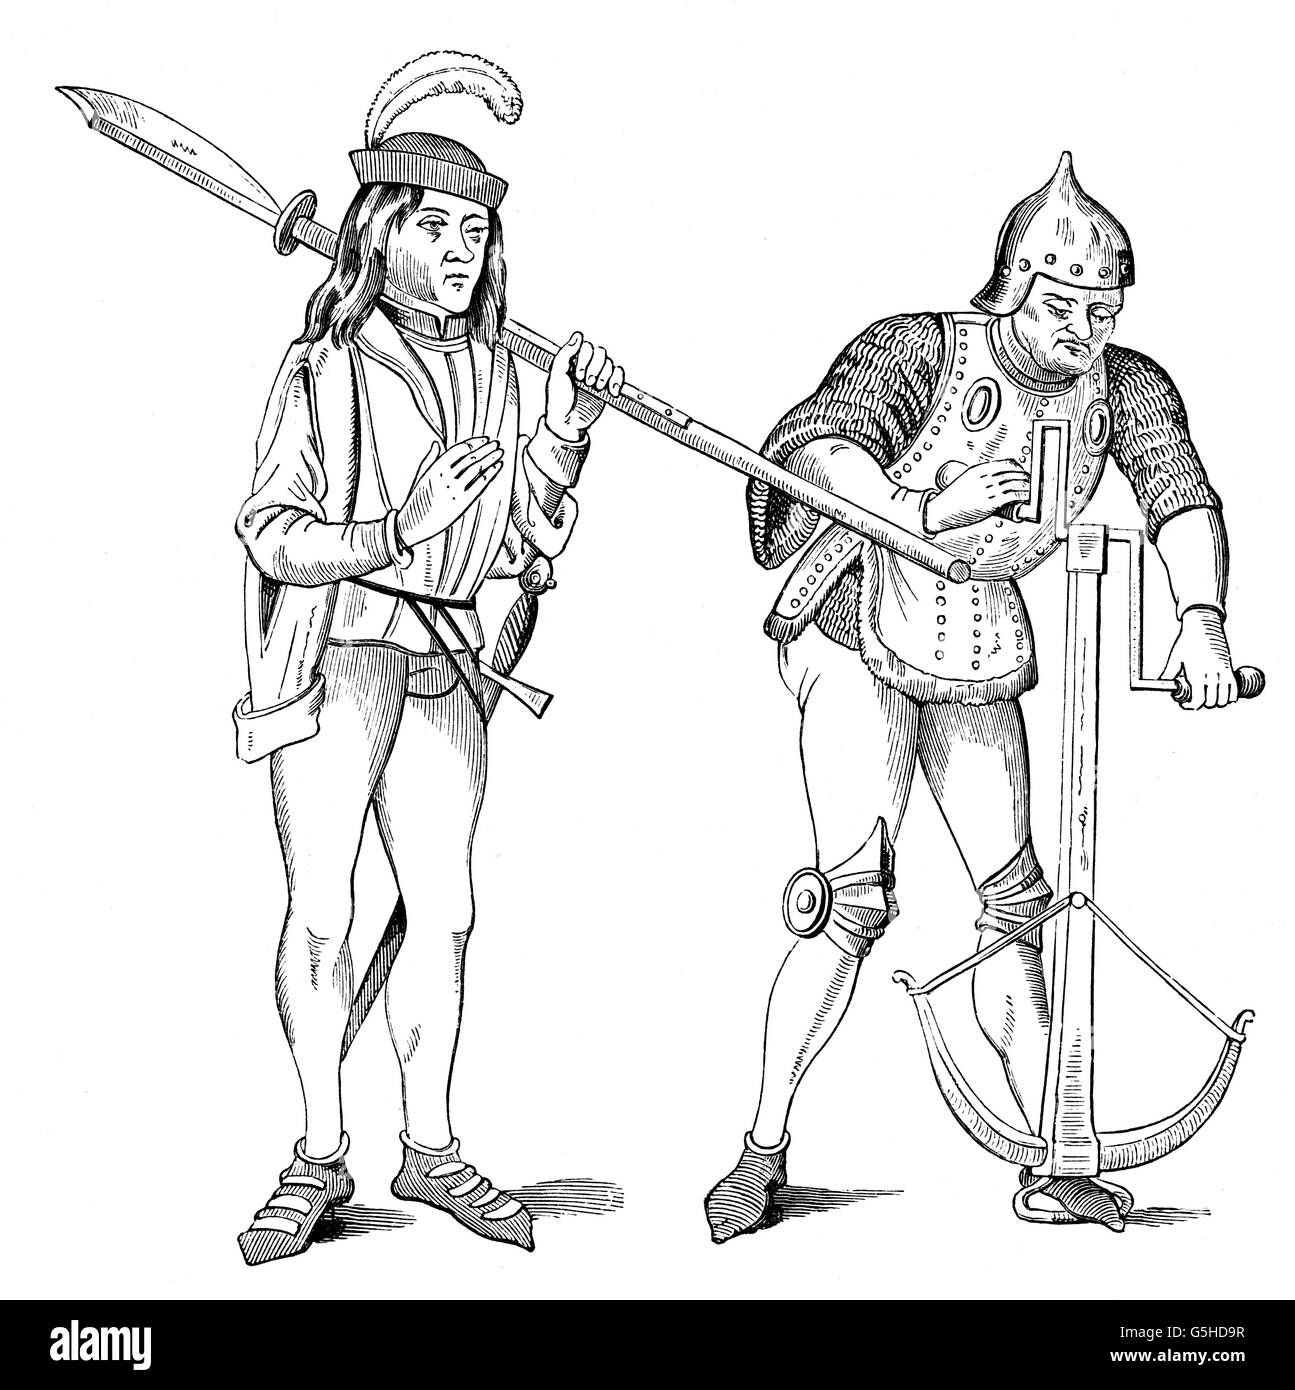 military, Middle Ages, soldiers, left: squire with bill (polearm), right: crossbowman, wood engraving after illustrations from manuscripts, 15th century, France, soldiers, soldier, sword, swords, arm, drawing, bending, helmet, helmets, suit of armour, crossbow, crossbows, weapon, weapons, arms, medieval, mediaeval, historic, historical, people, Additional-Rights-Clearences-Not Available Stock Photo